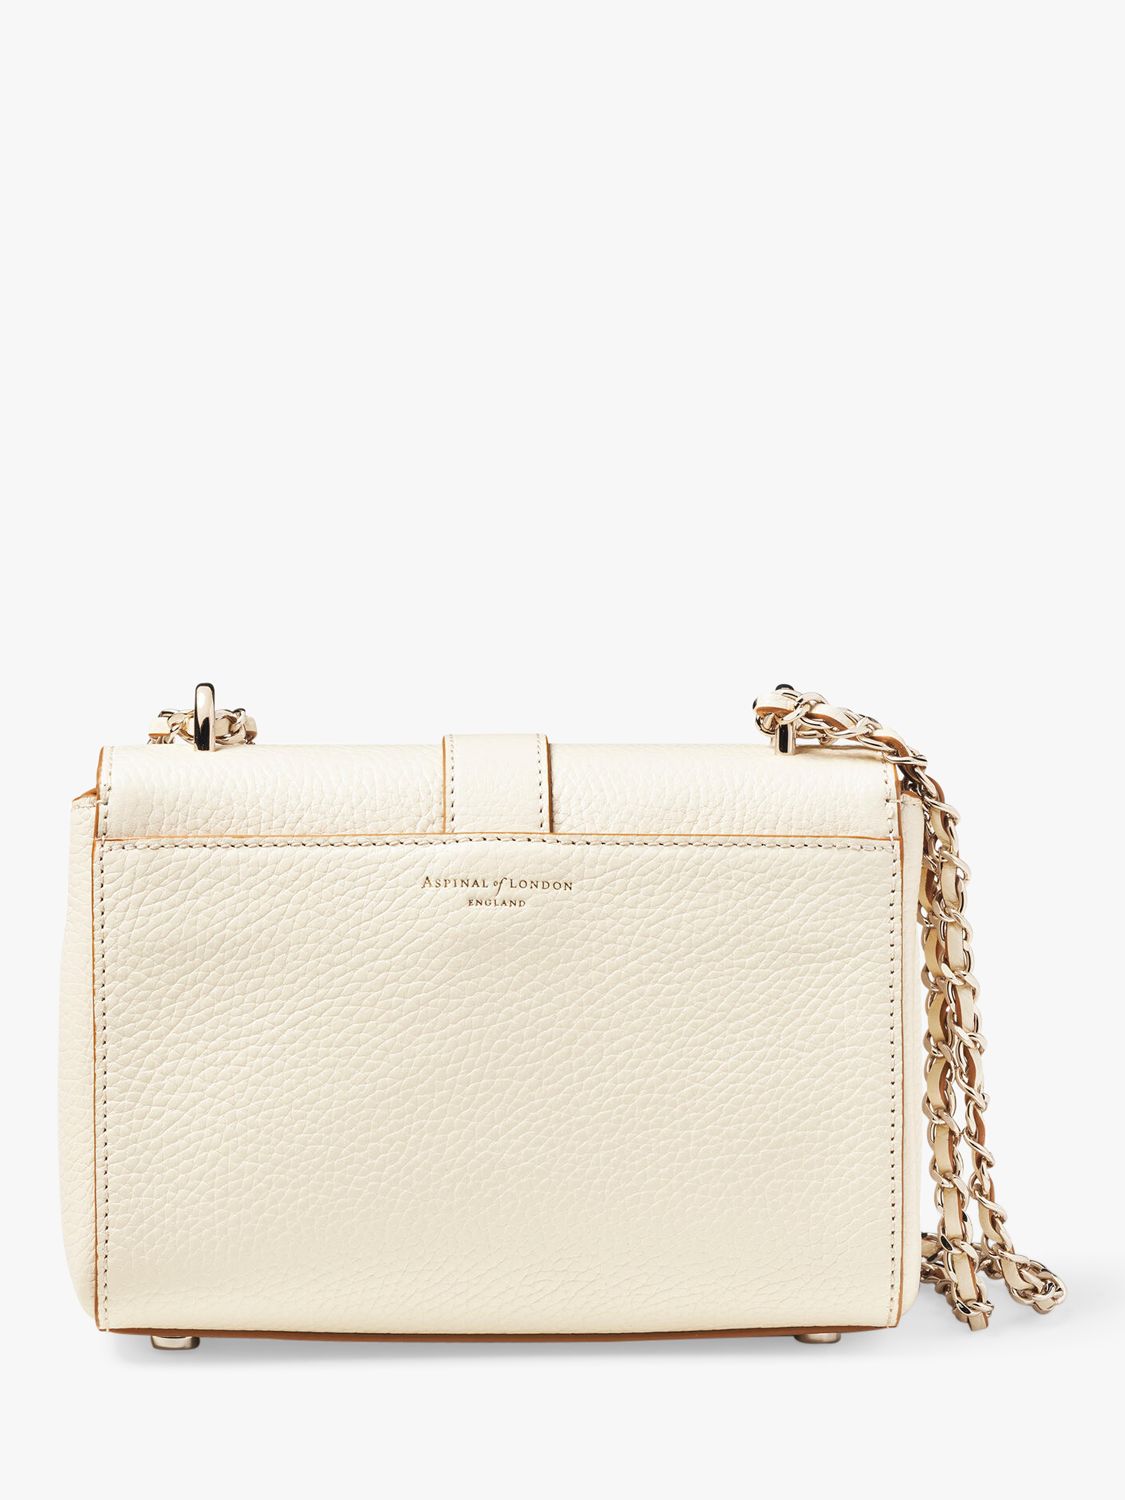 Aspinal of London Lottie Small Pebble Leather Shoulder Bag, Ivory at ...